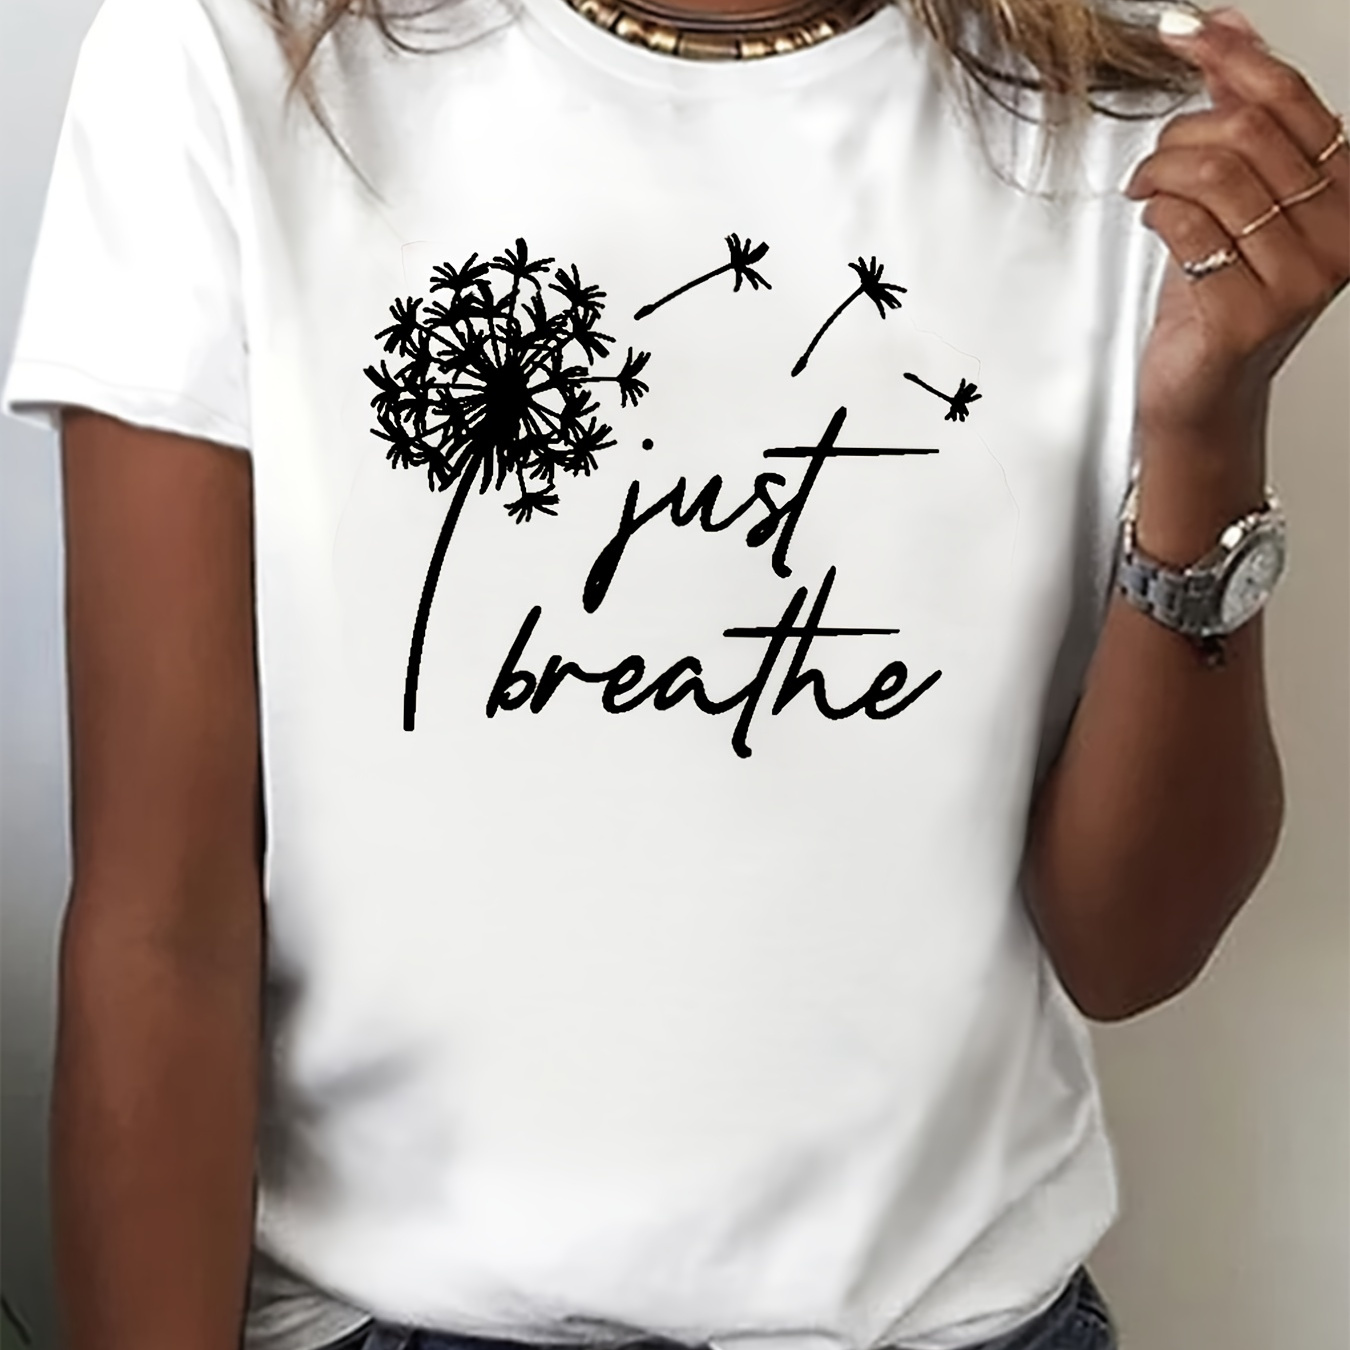 

Dandelion & Slogan Print Crew Neck T-shirt, Casual Short Sleeve Top For Spring & Fall, Women's Clothing